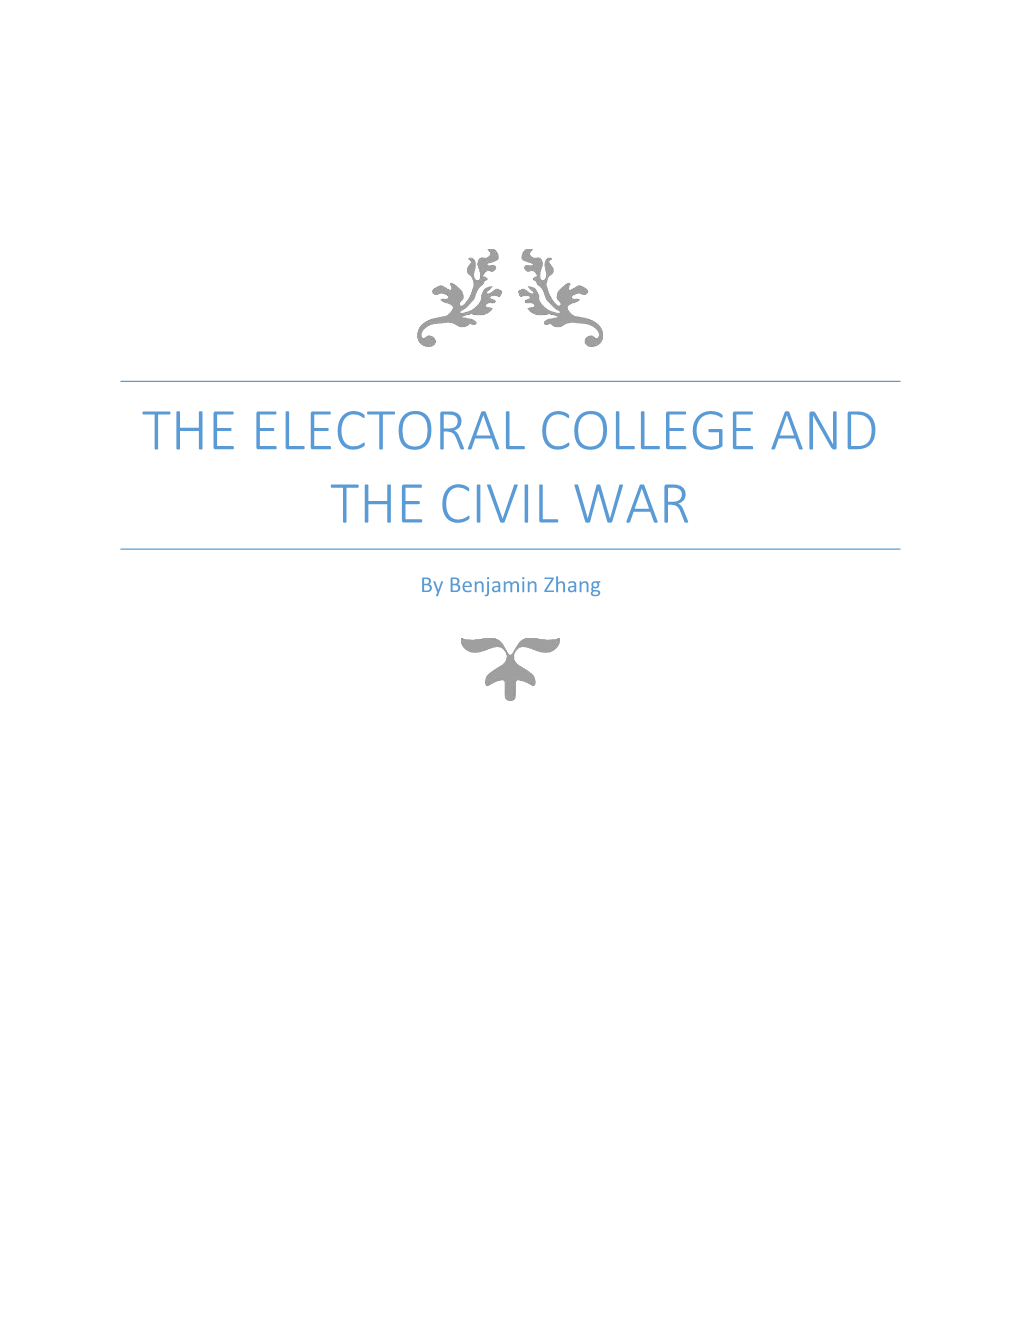 The Electoral College and the Civil War